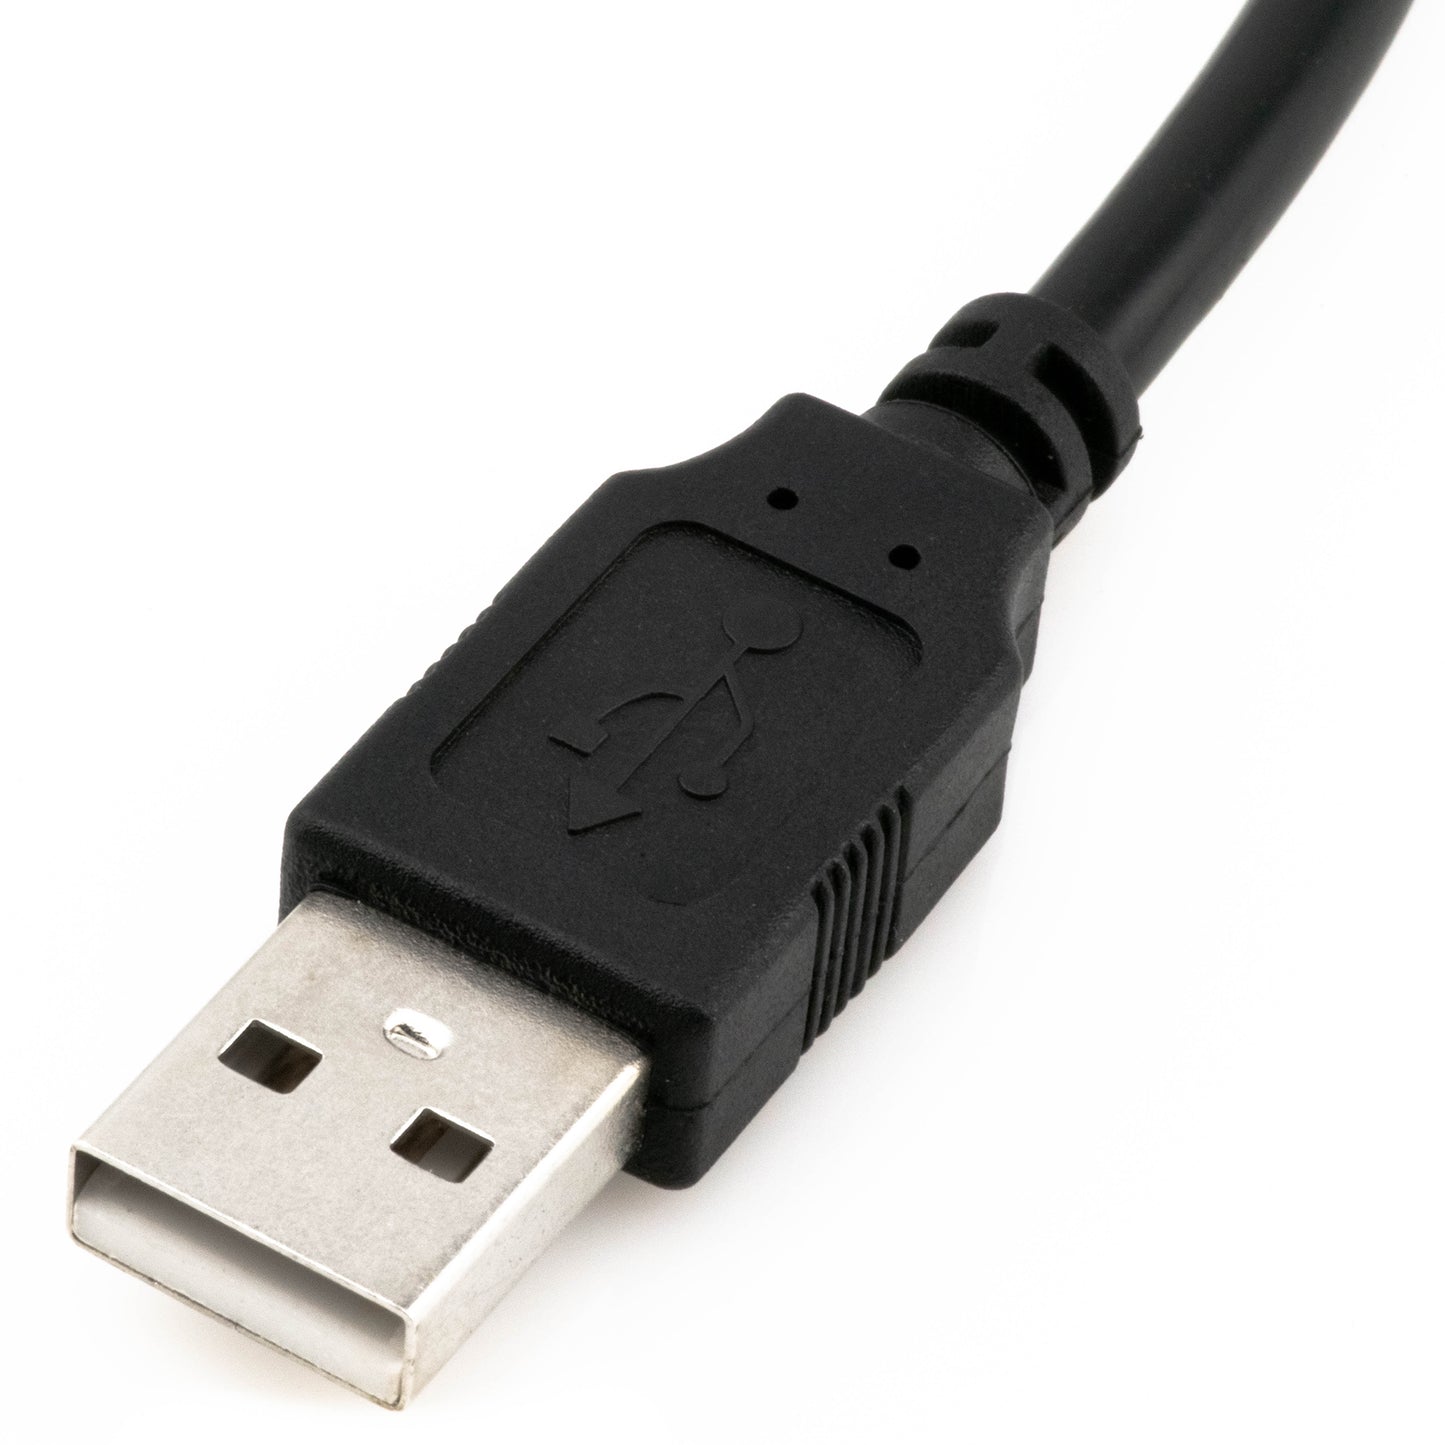 9-Pin USB IDC Dupont Male Header to Single USB 2.0 Type A Male Cable